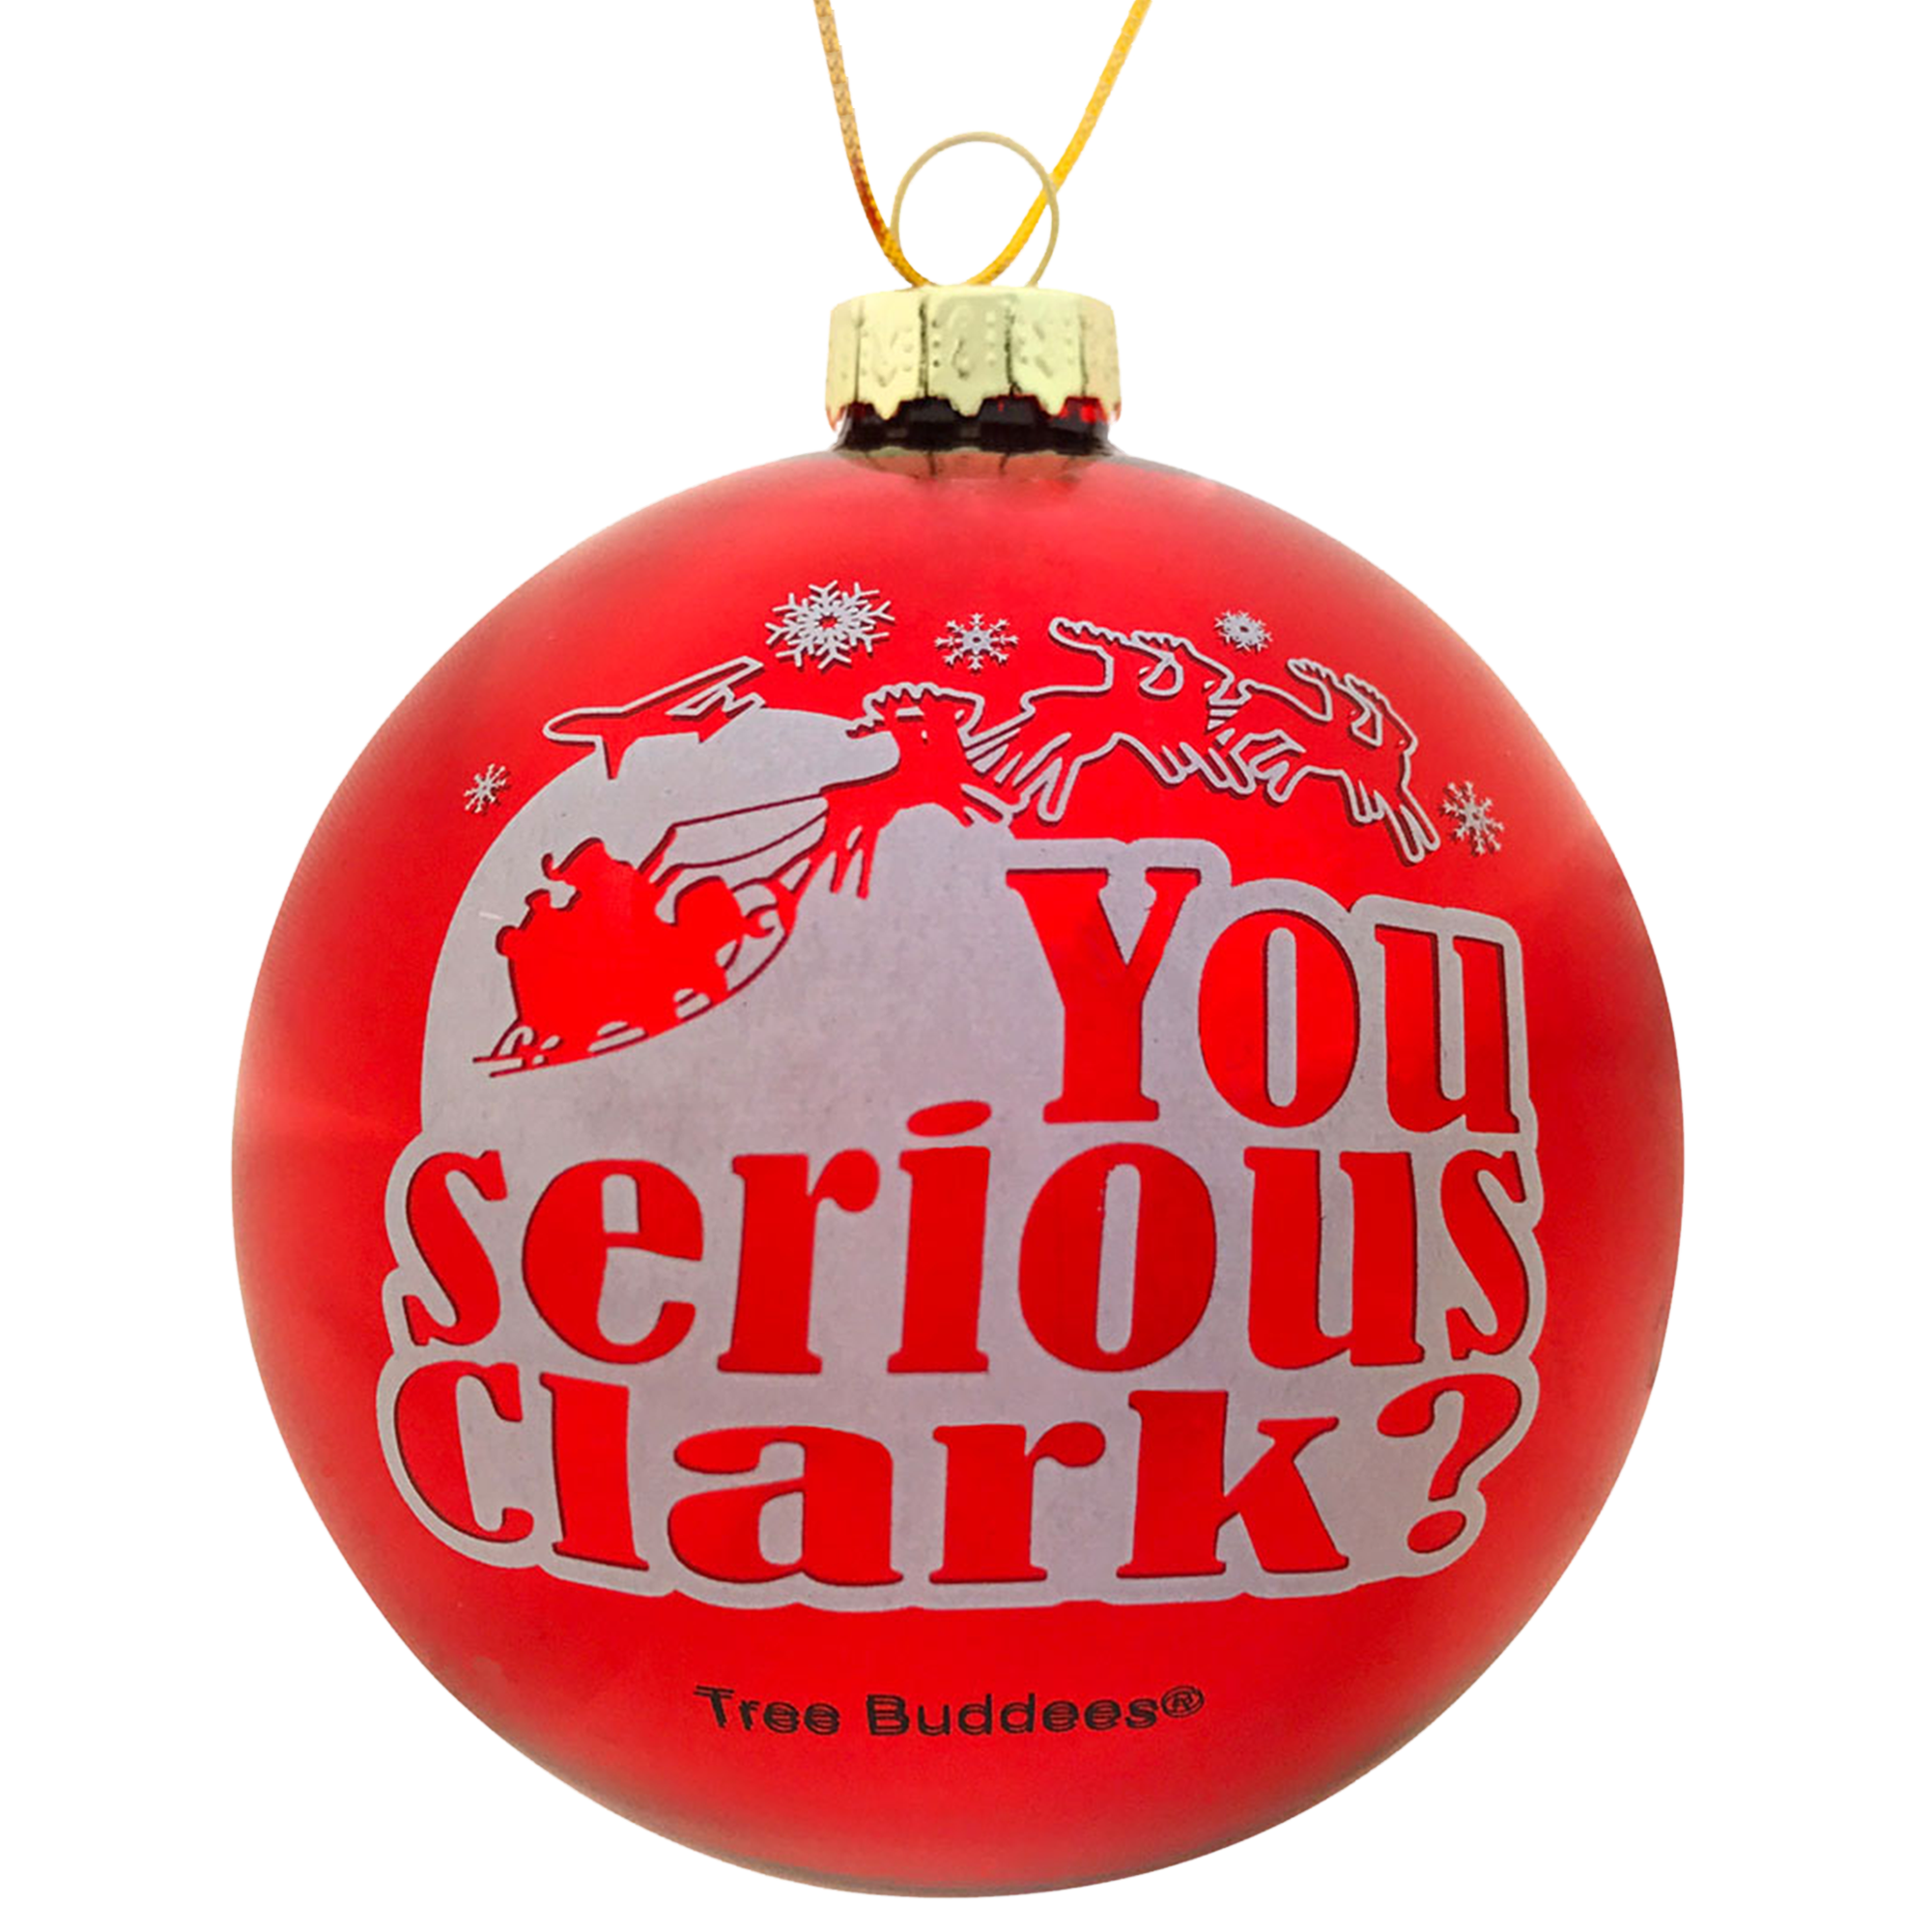 You Serious Clark? Red Glass Christmas Ornament